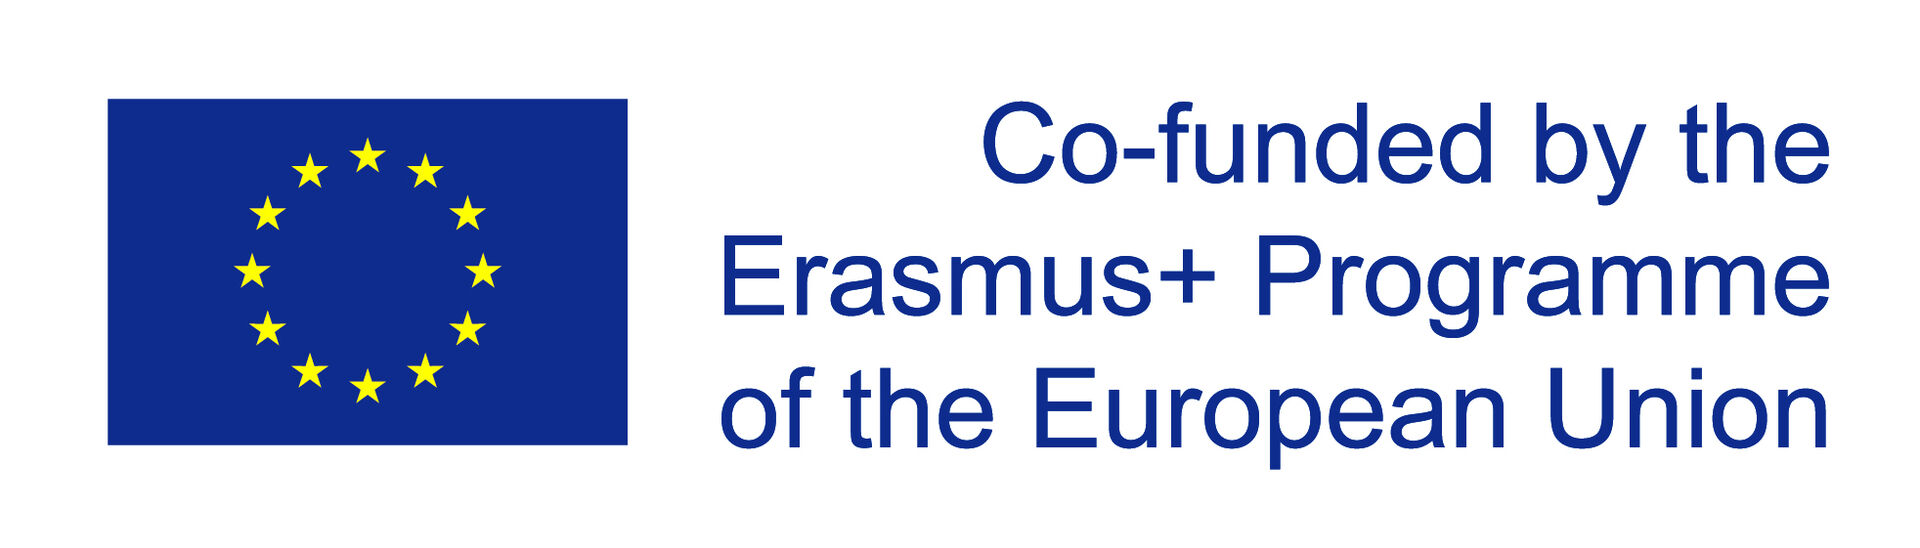 Co-funded by the Erasmus+ program of the European Union